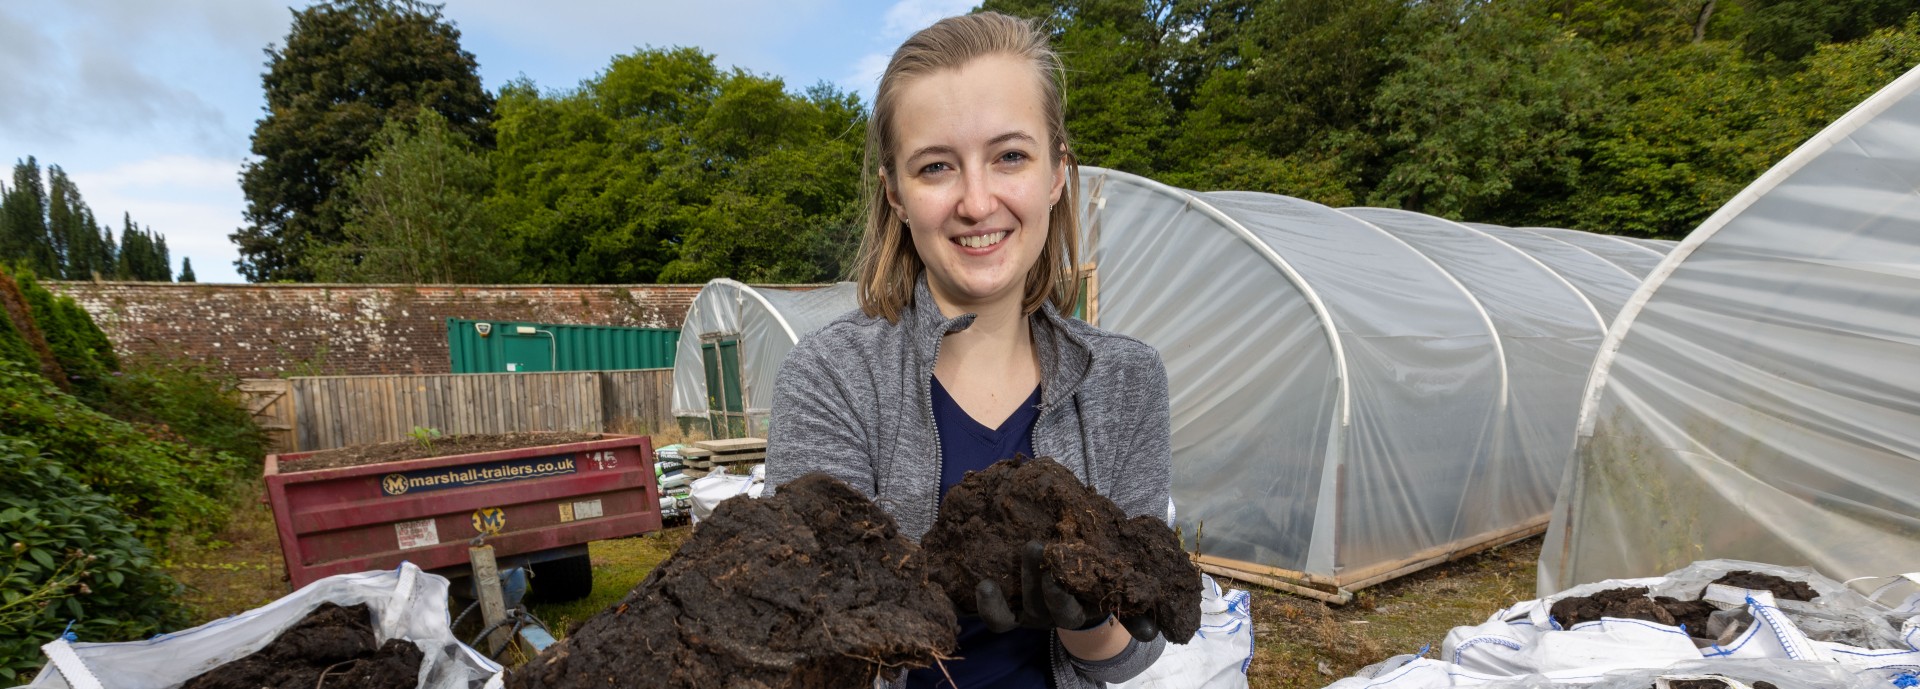 PhD researcher Georgina Page at University of Stirling with peat samples